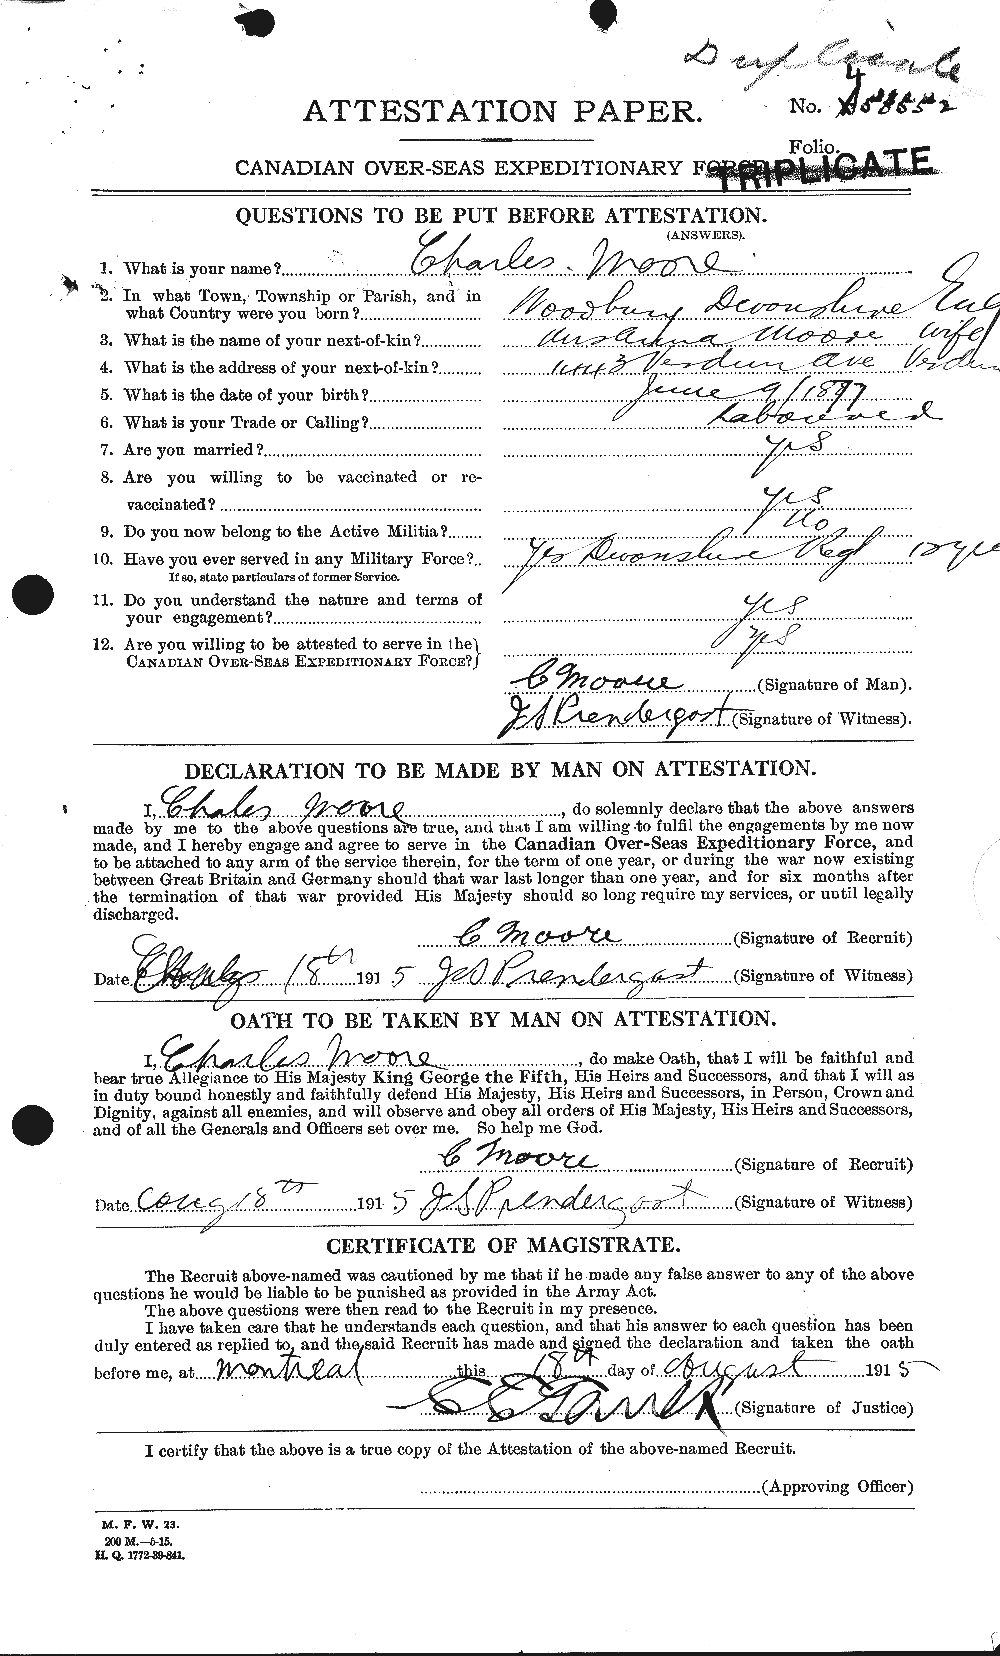 Personnel Records of the First World War - CEF 506482a